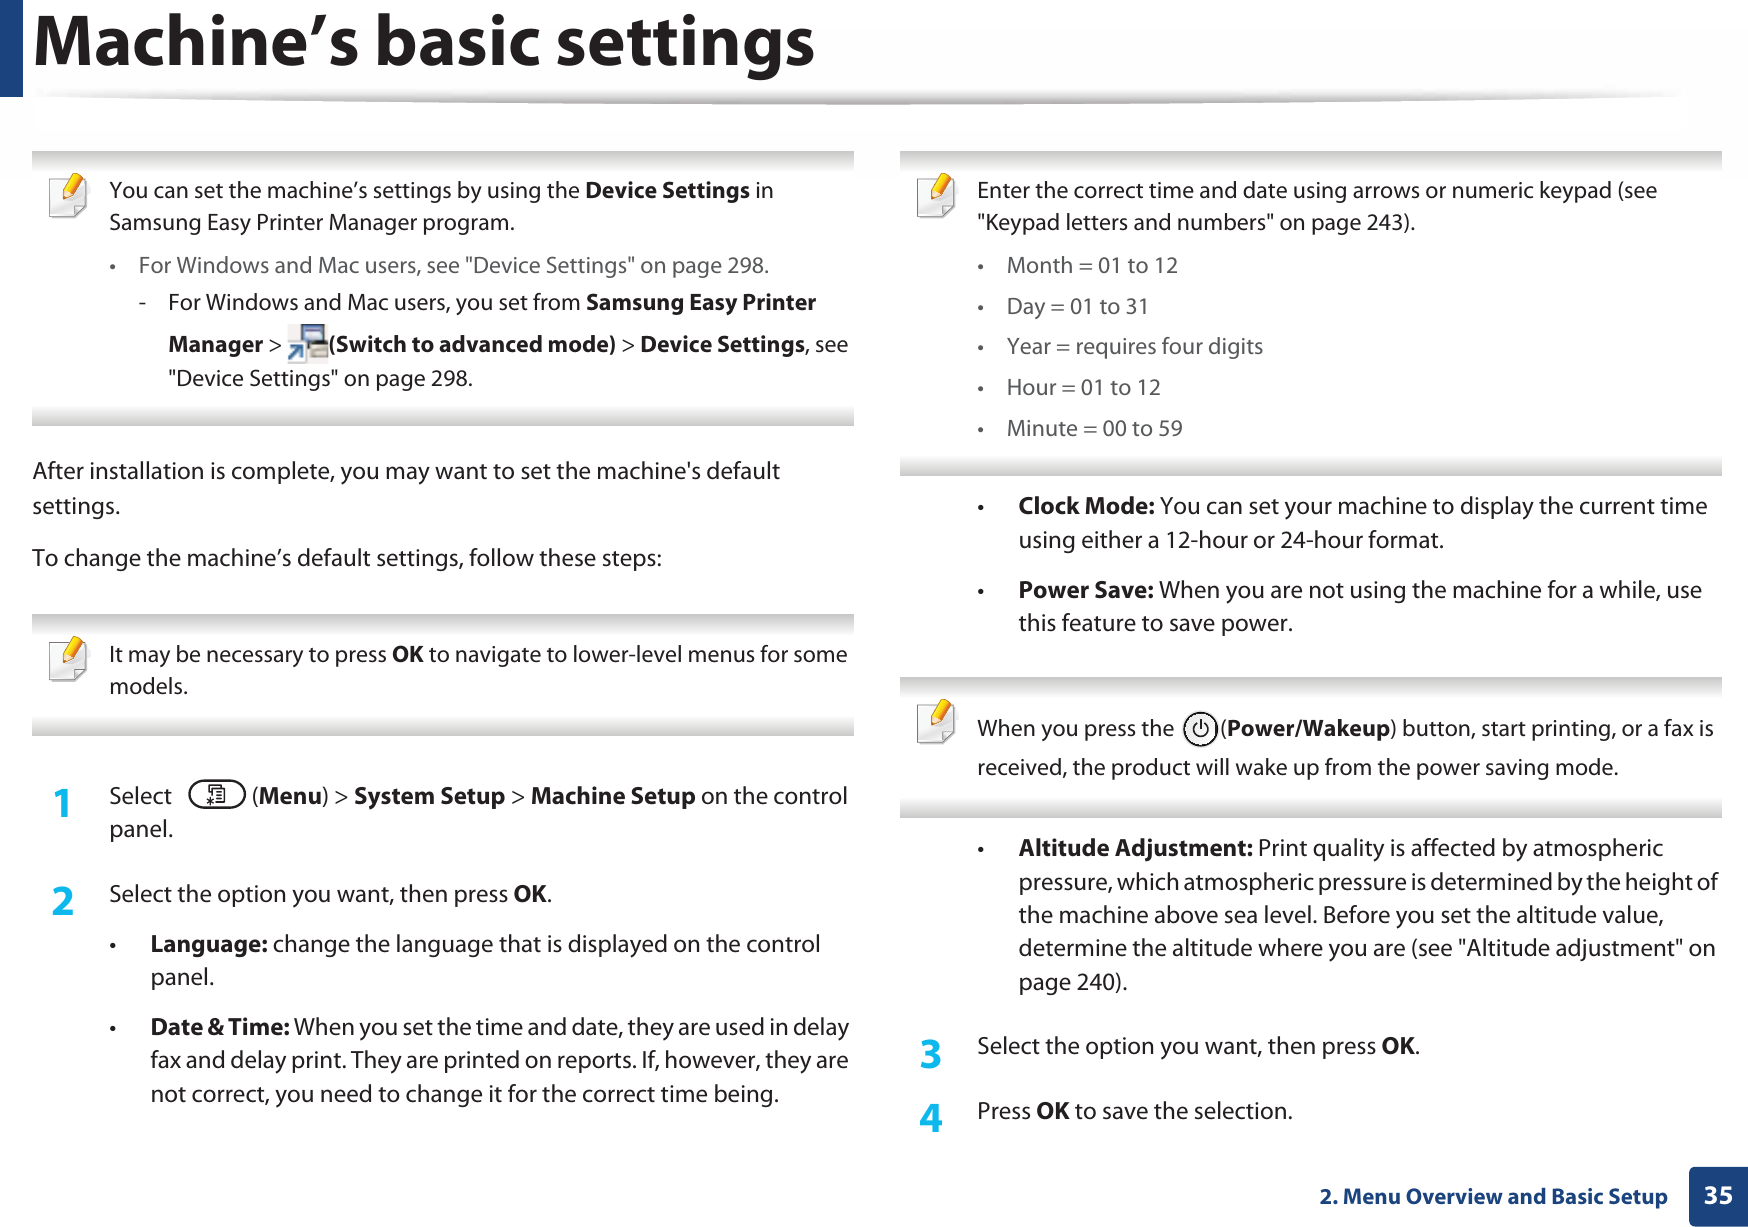 352. Menu Overview and Basic SetupMachine’s basic settings You can set the machine’s settings by using the Device Settings in Samsung Easy Printer Manager program.• For Windows and Mac users, see &quot;Device Settings&quot; on page 298.- For Windows and Mac users, you set from Samsung Easy Printer Manager &gt;  (Switch to advanced mode) &gt; Device Settings, see &quot;Device Settings&quot; on page 298. After installation is complete, you may want to set the machine&apos;s default settings. To change the machine’s default settings, follow these steps: It may be necessary to press OK to navigate to lower-level menus for some models. 1Select (Menu) &gt; System Setup &gt; Machine Setup on the control panel.2  Select the option you want, then press OK.•Language: change the language that is displayed on the control panel.•Date &amp; Time: When you set the time and date, they are used in delay fax and delay print. They are printed on reports. If, however, they are not correct, you need to change it for the correct time being. Enter the correct time and date using arrows or numeric keypad (see &quot;Keypad letters and numbers&quot; on page 243).• Month = 01 to 12• Day = 01 to 31• Year = requires four digits• Hour = 01 to 12• Minute = 00 to 59 •Clock Mode: You can set your machine to display the current time using either a 12-hour or 24-hour format.•Power Save: When you are not using the machine for a while, use this feature to save power. When you press the  (Power/Wakeup) button, start printing, or a fax is received, the product will wake up from the power saving mode. •Altitude Adjustment: Print quality is affected by atmospheric pressure, which atmospheric pressure is determined by the height of the machine above sea level. Before you set the altitude value, determine the altitude where you are (see &quot;Altitude adjustment&quot; on page 240).3  Select the option you want, then press OK.4  Press OK to save the selection.